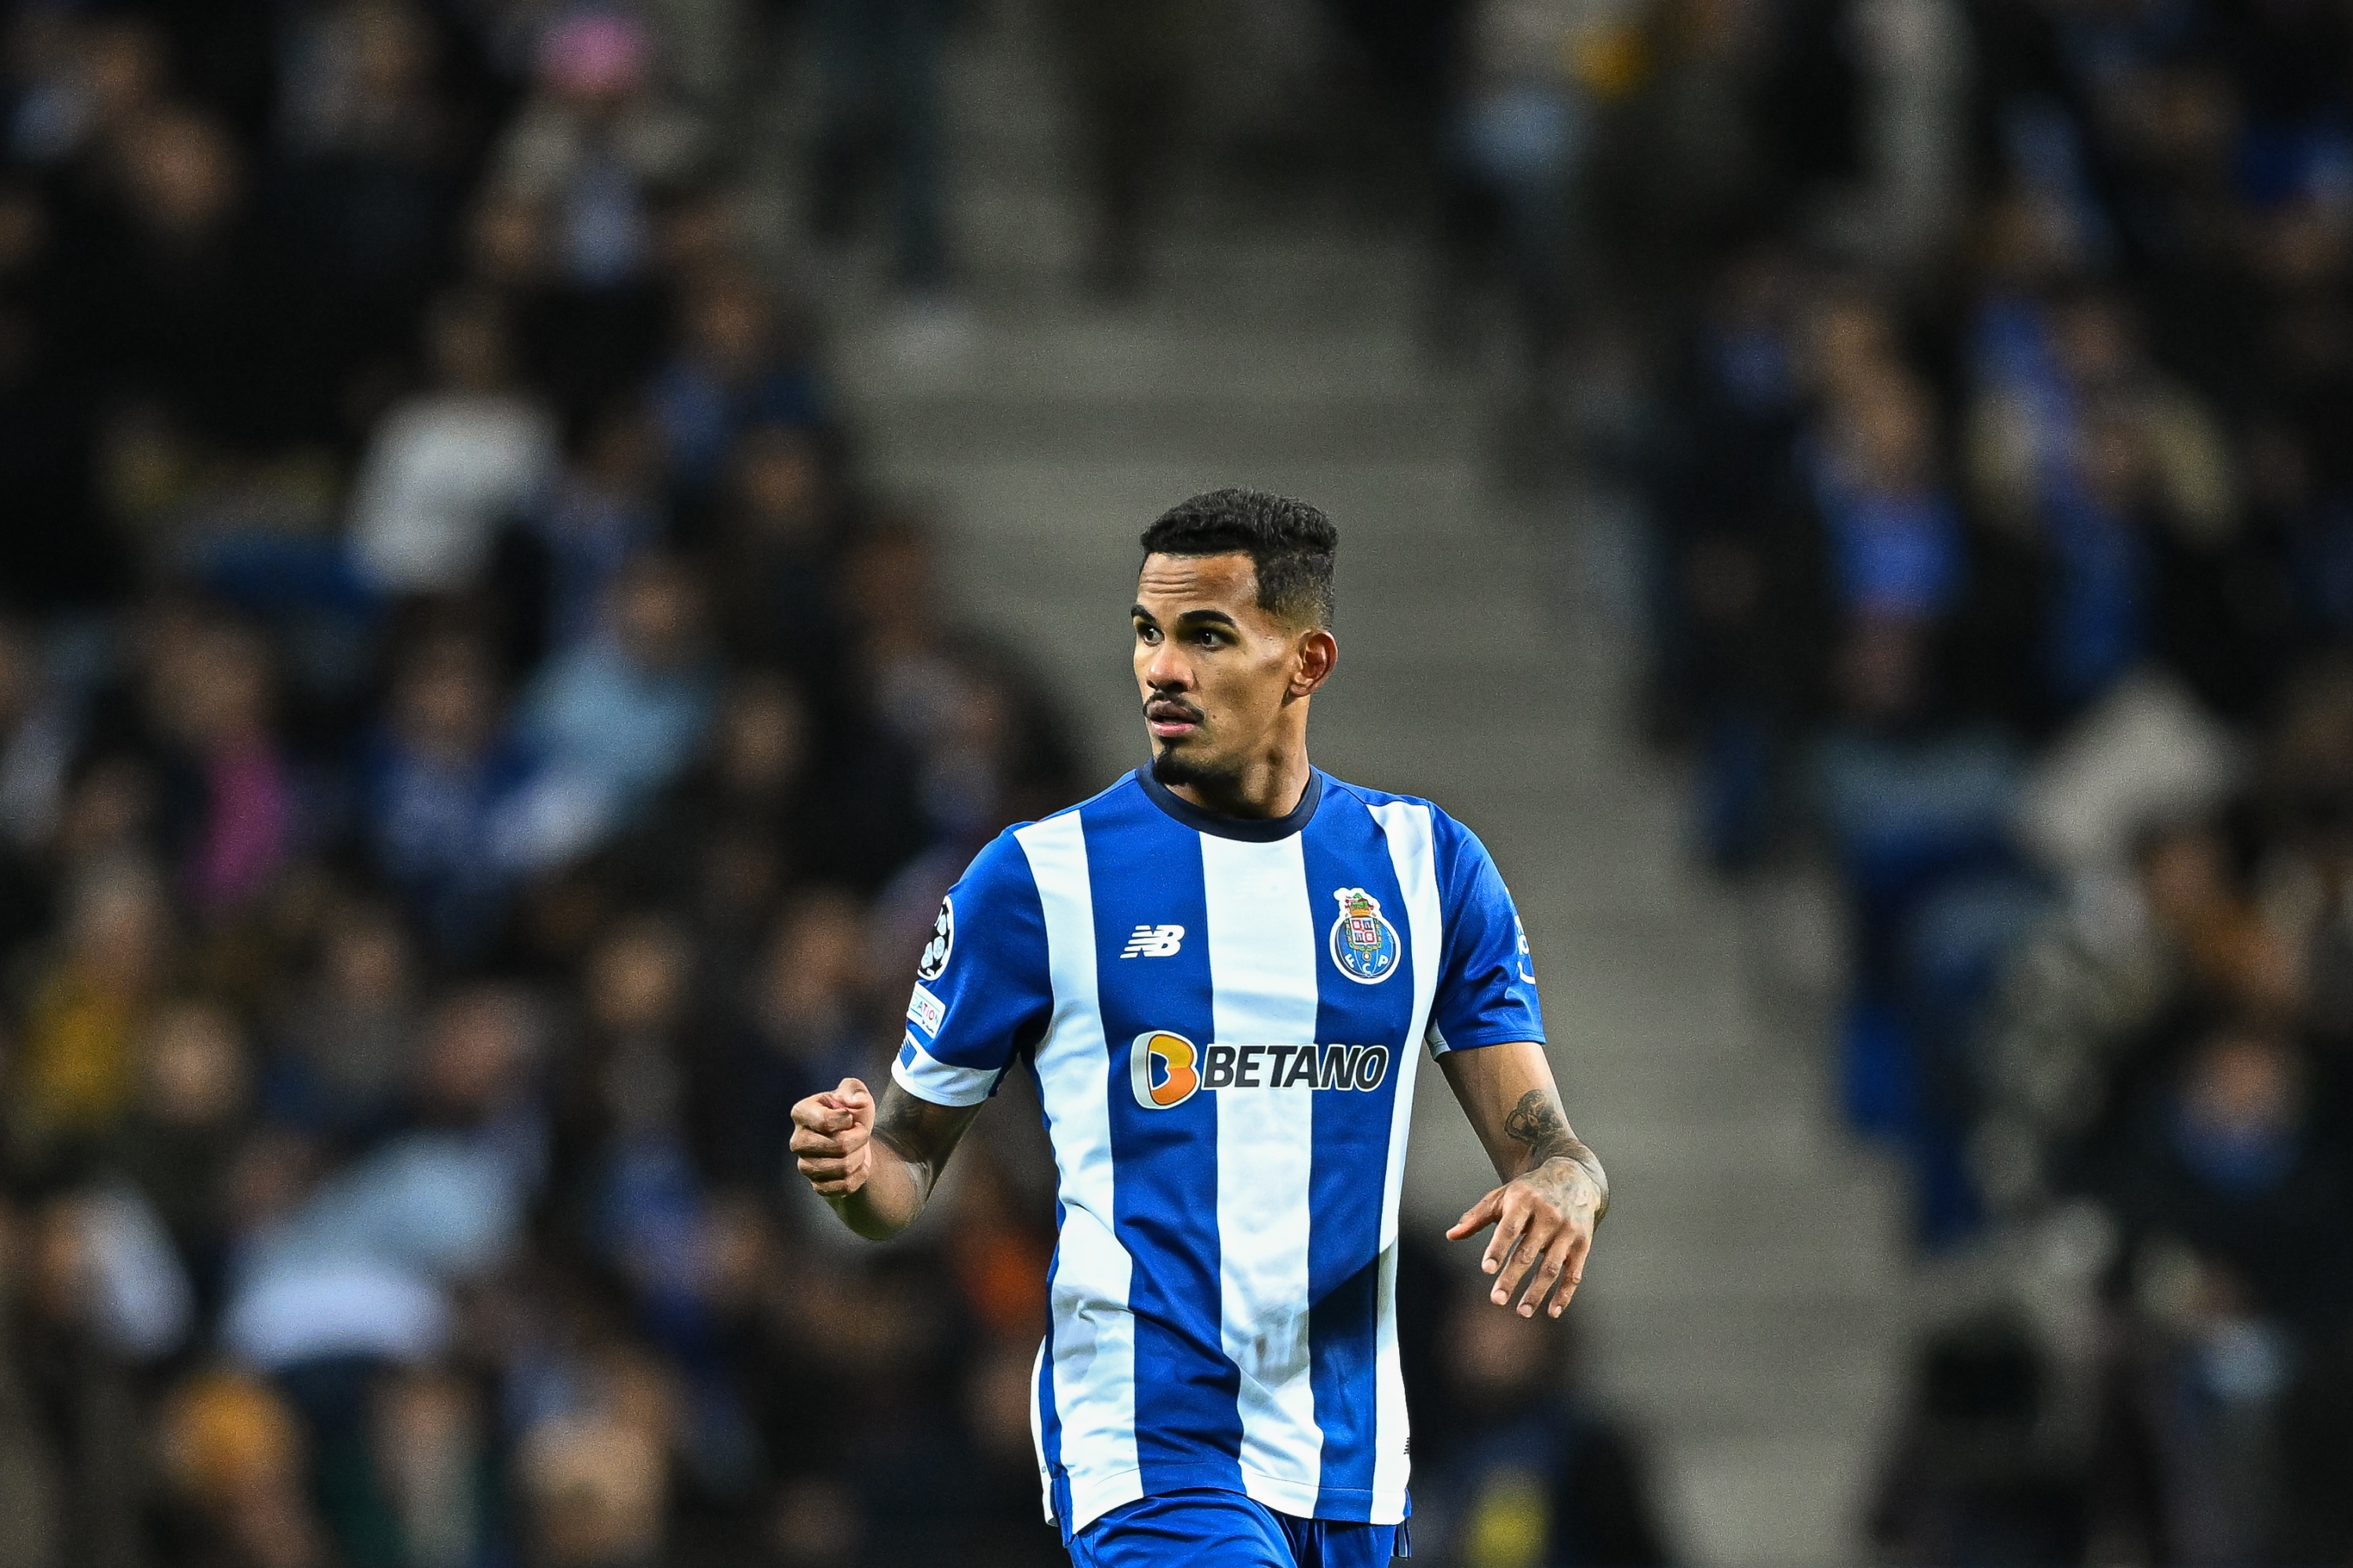 PORTO, PORTUGAL - DECEMBER 13: Wenderson Galeno of FC Porto celebrates after scores their team's first goal during the UEFA Champions League match between FC Porto and FC Shakhtar Donetsk at Estadio do Dragao on December 13, 2023 in Porto, Portugal. (Photo by Octavio Passos/Getty Images)